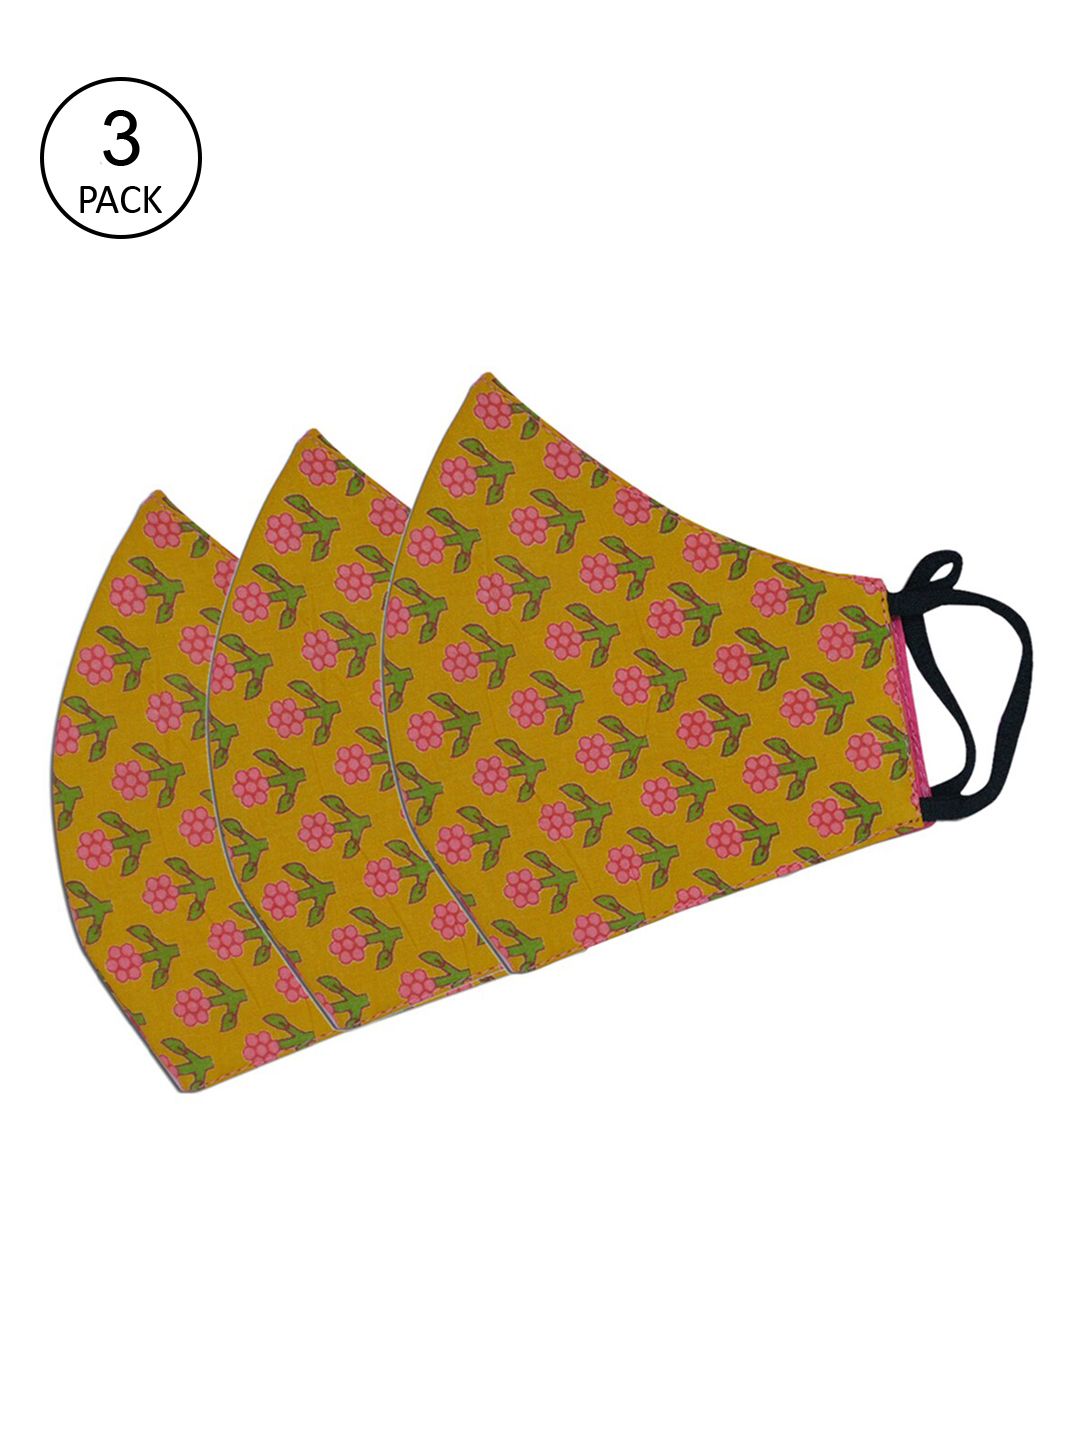 Tossido Pack Of 3 Yellow & Green Floral Printed 3-Ply 100% Cotton Reusable Cloth Masks Price in India